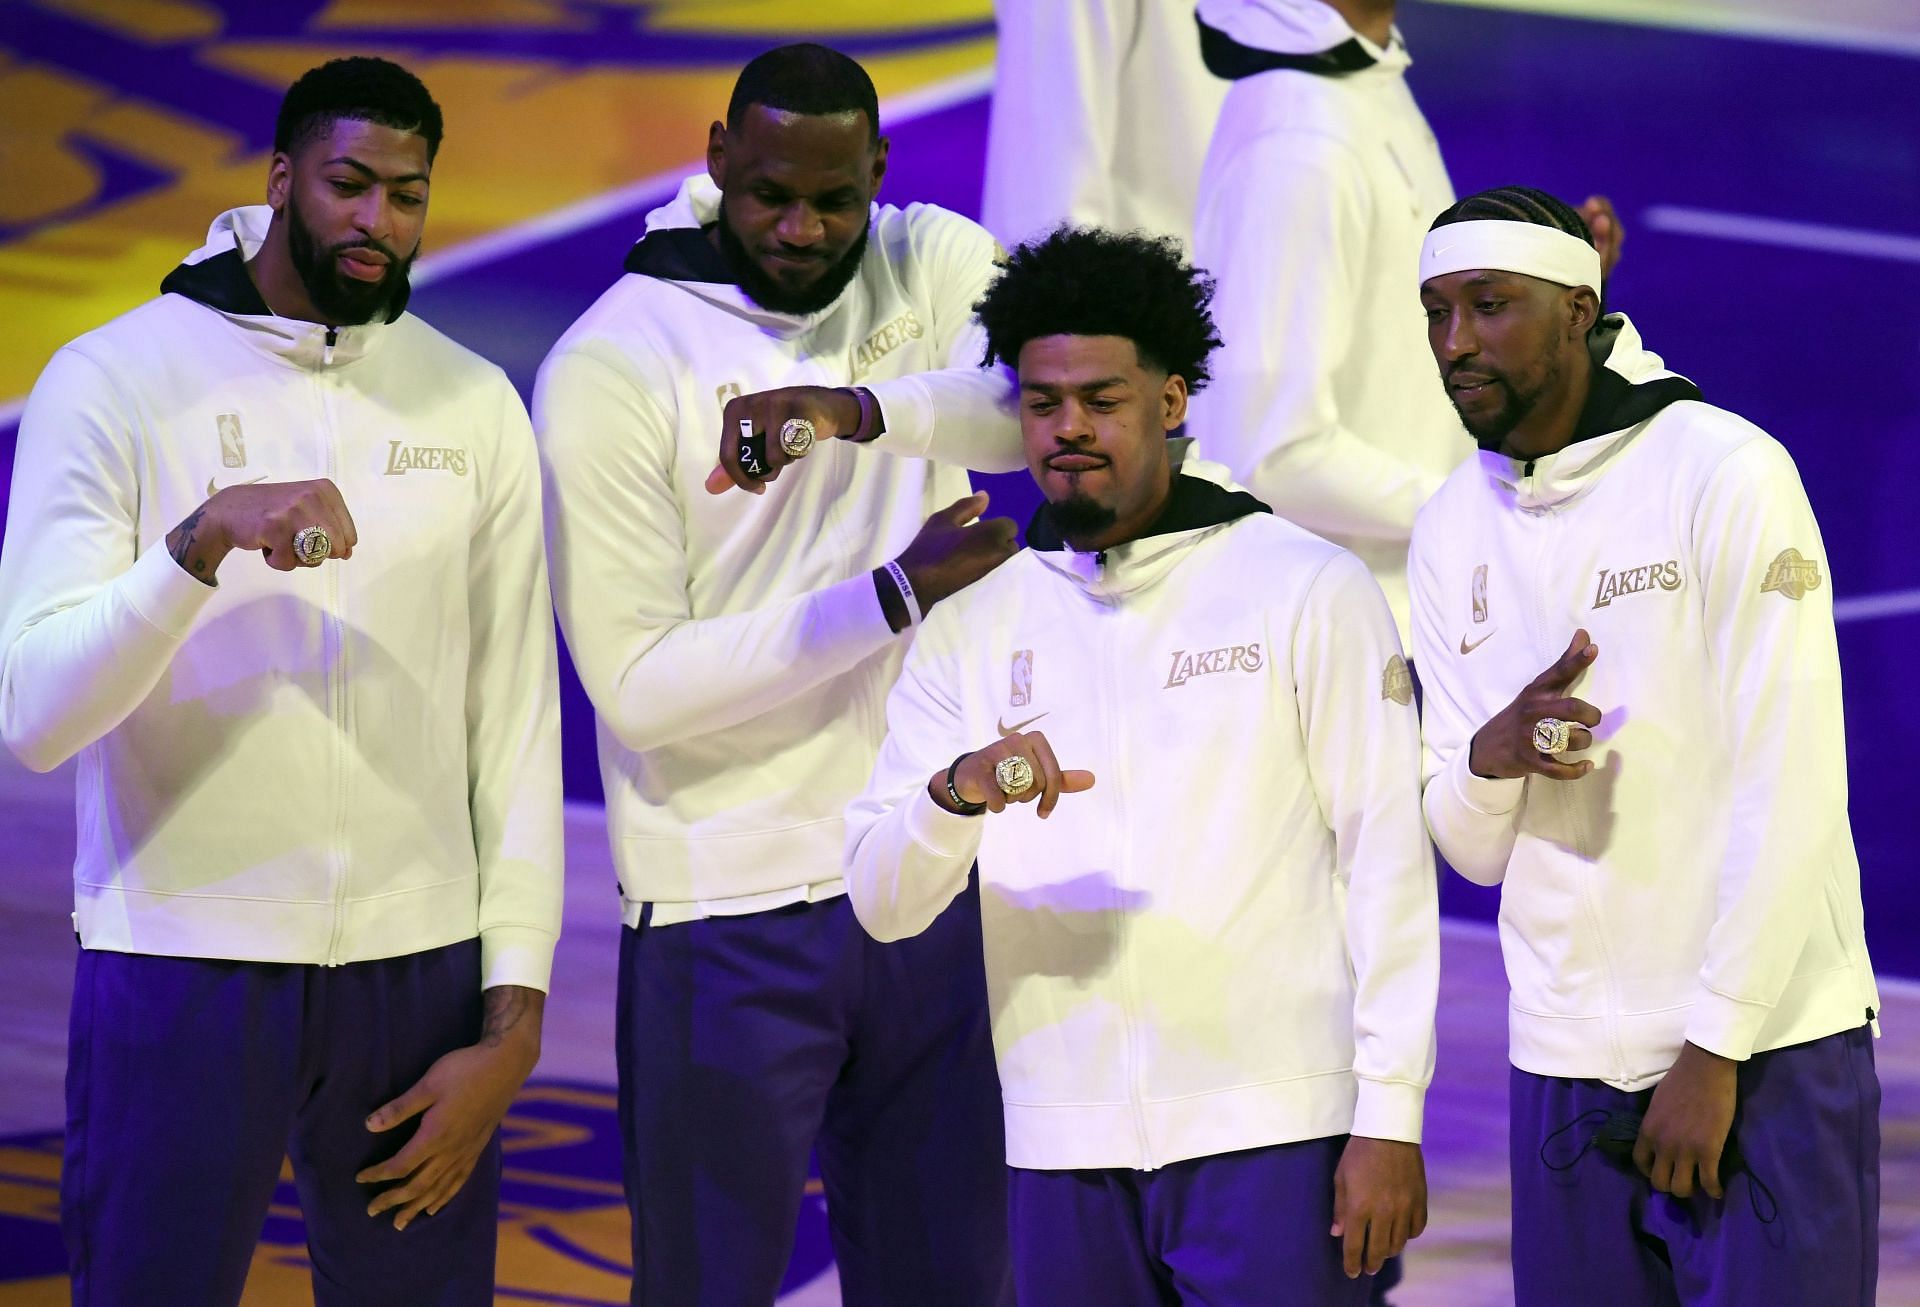 (L-R) Anthony Davis, LeBron James, Quinn Cook and Kentavious Caldwell-Pope of the Los Angeles Lakers pose during the 2020 NBA championship ring ceremony.